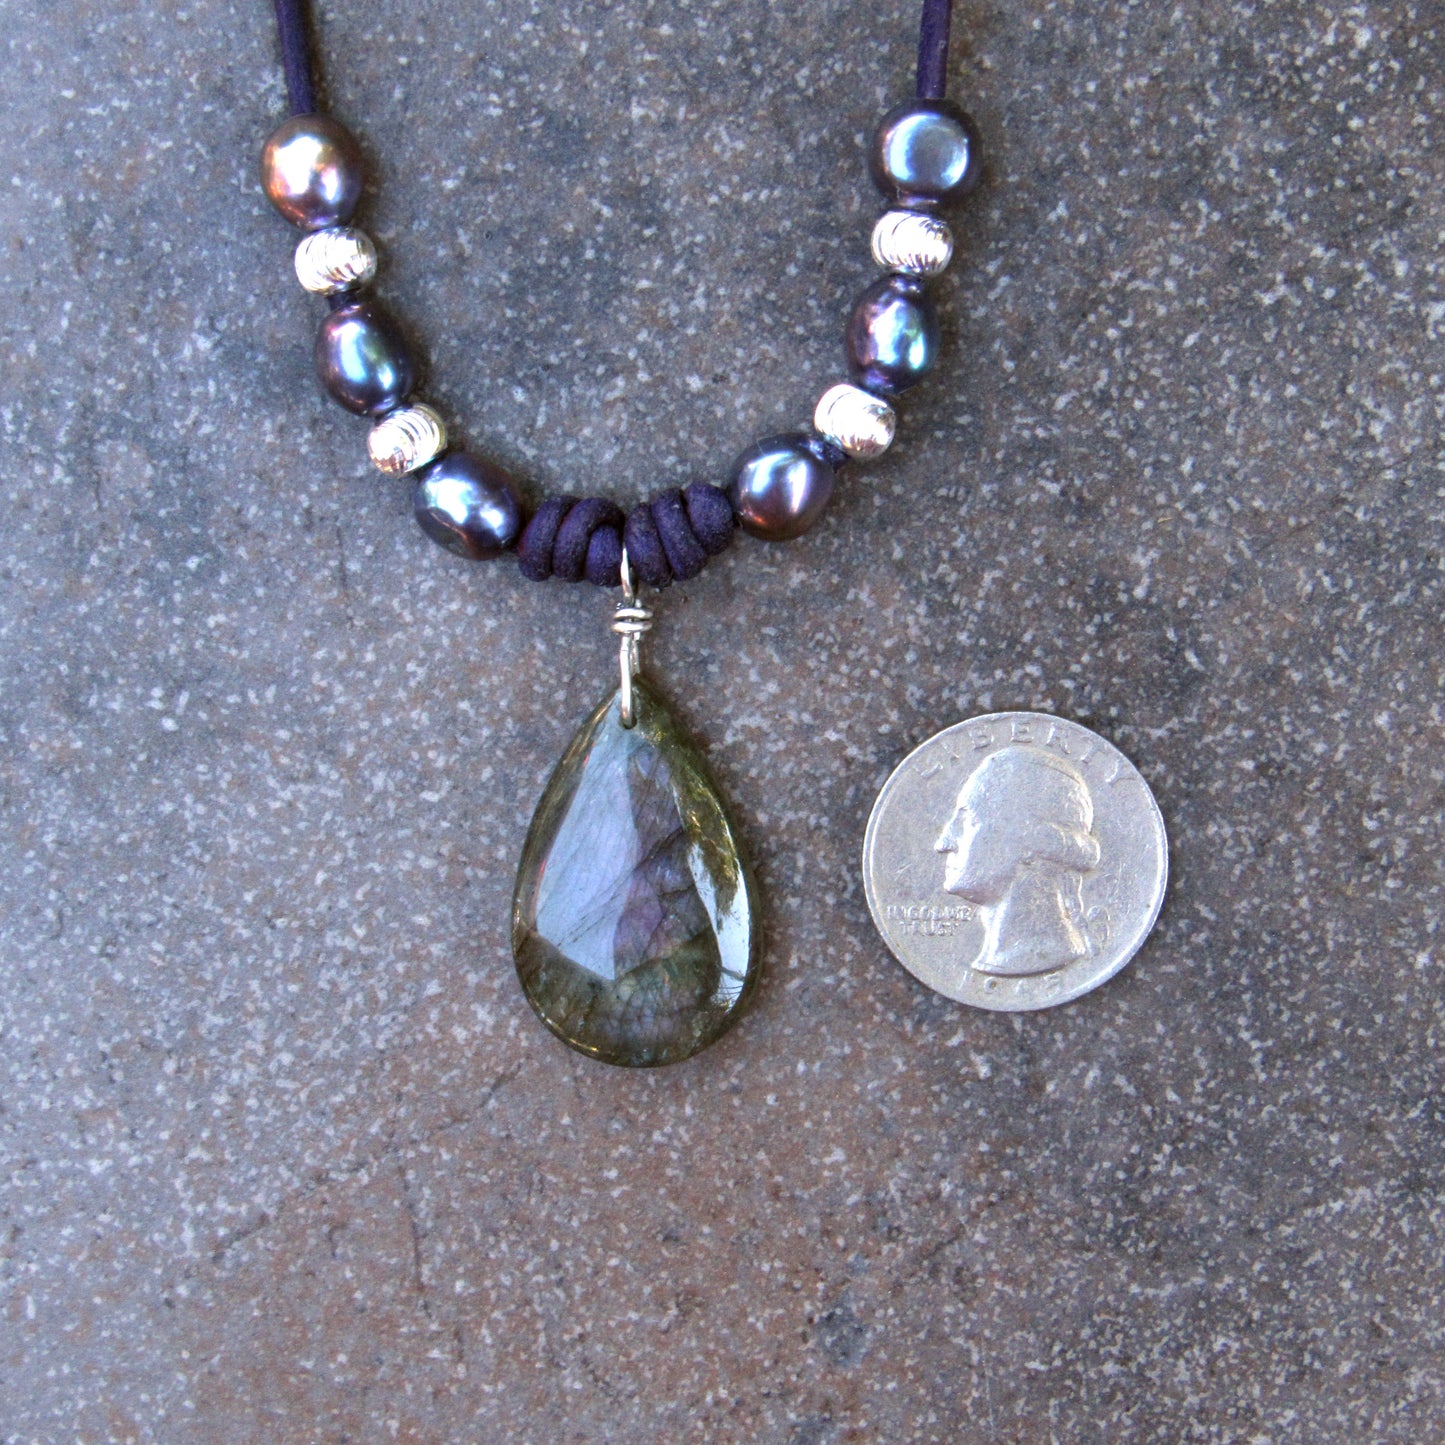 Purple Teardrop Labradorite Pendants, Freshwater Pearls, Sterling Silver Beads and Clasp on Purple Leather